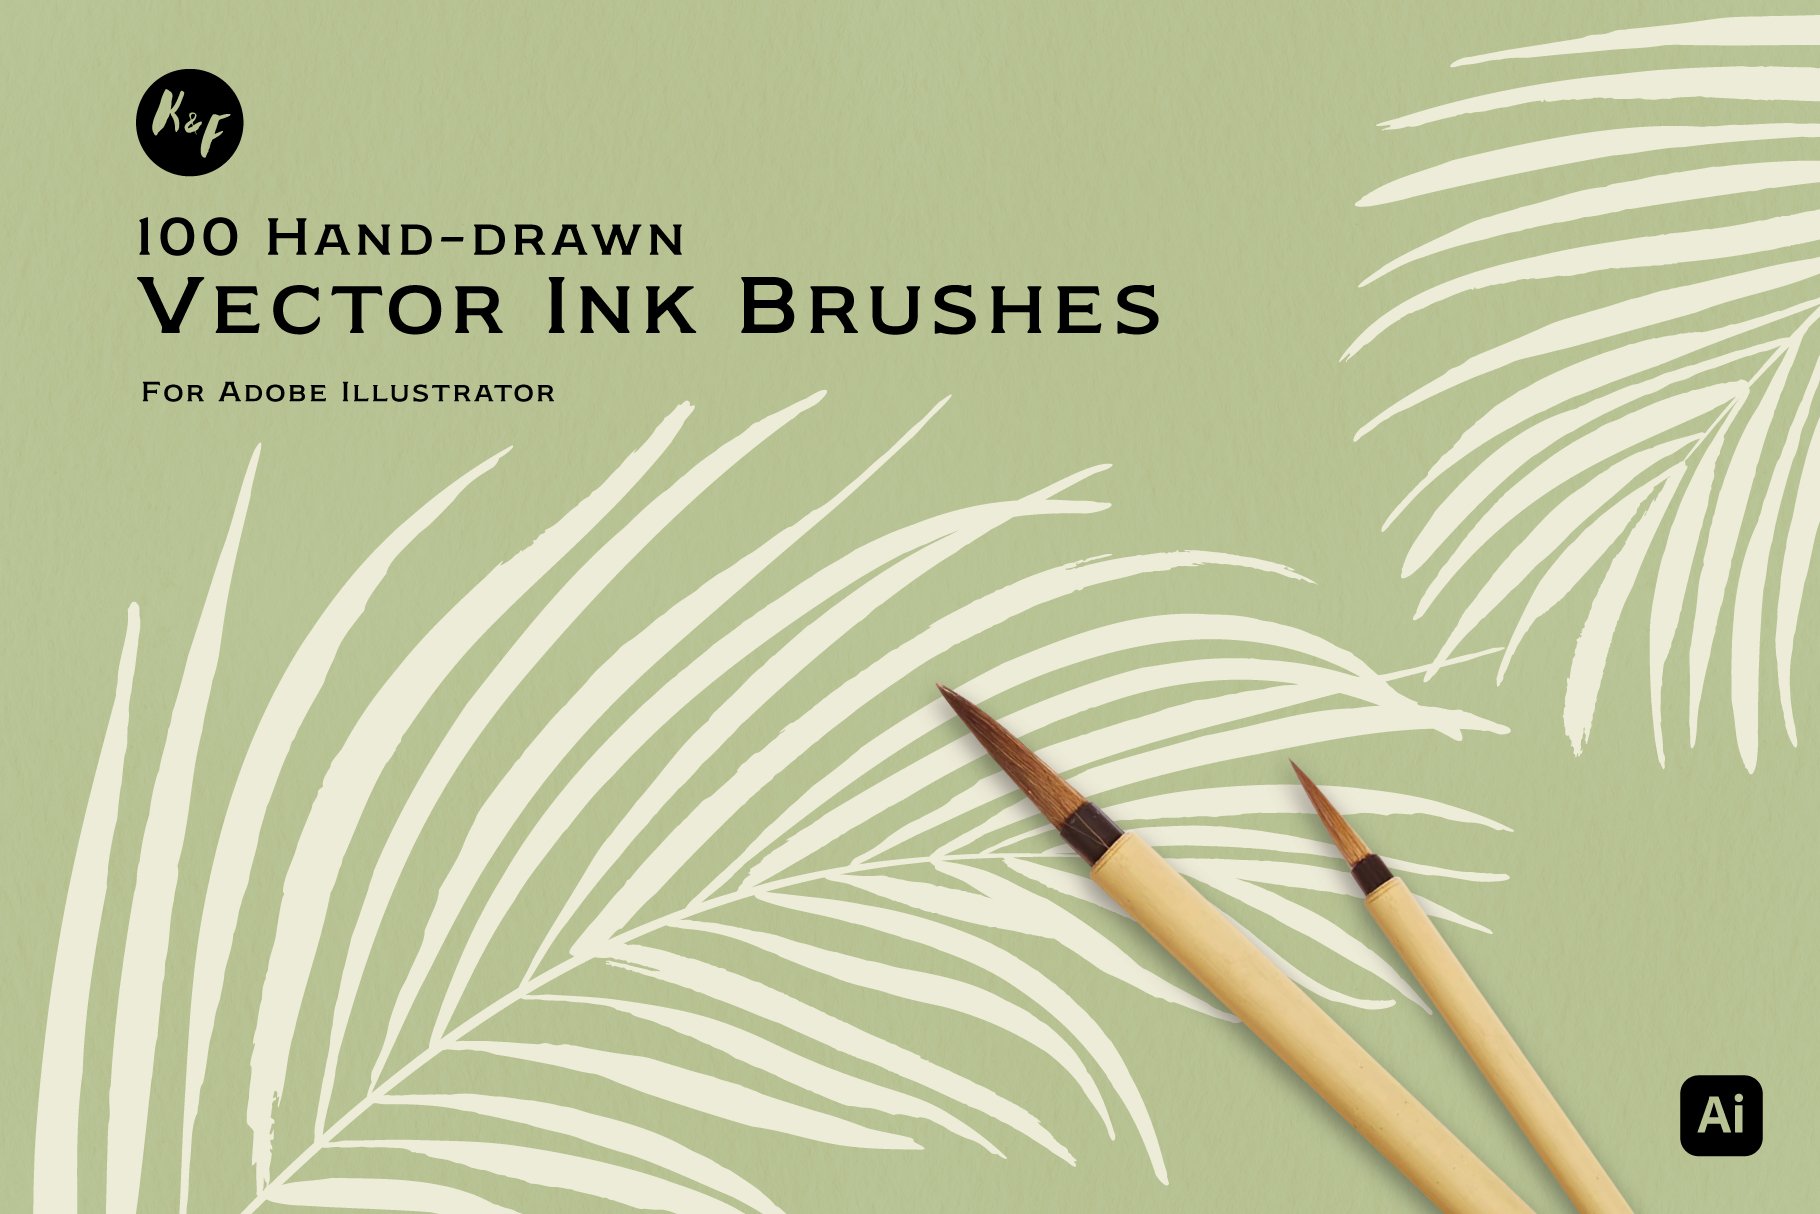 100 Hand-Drawn Vector Ink Brushes cover image.